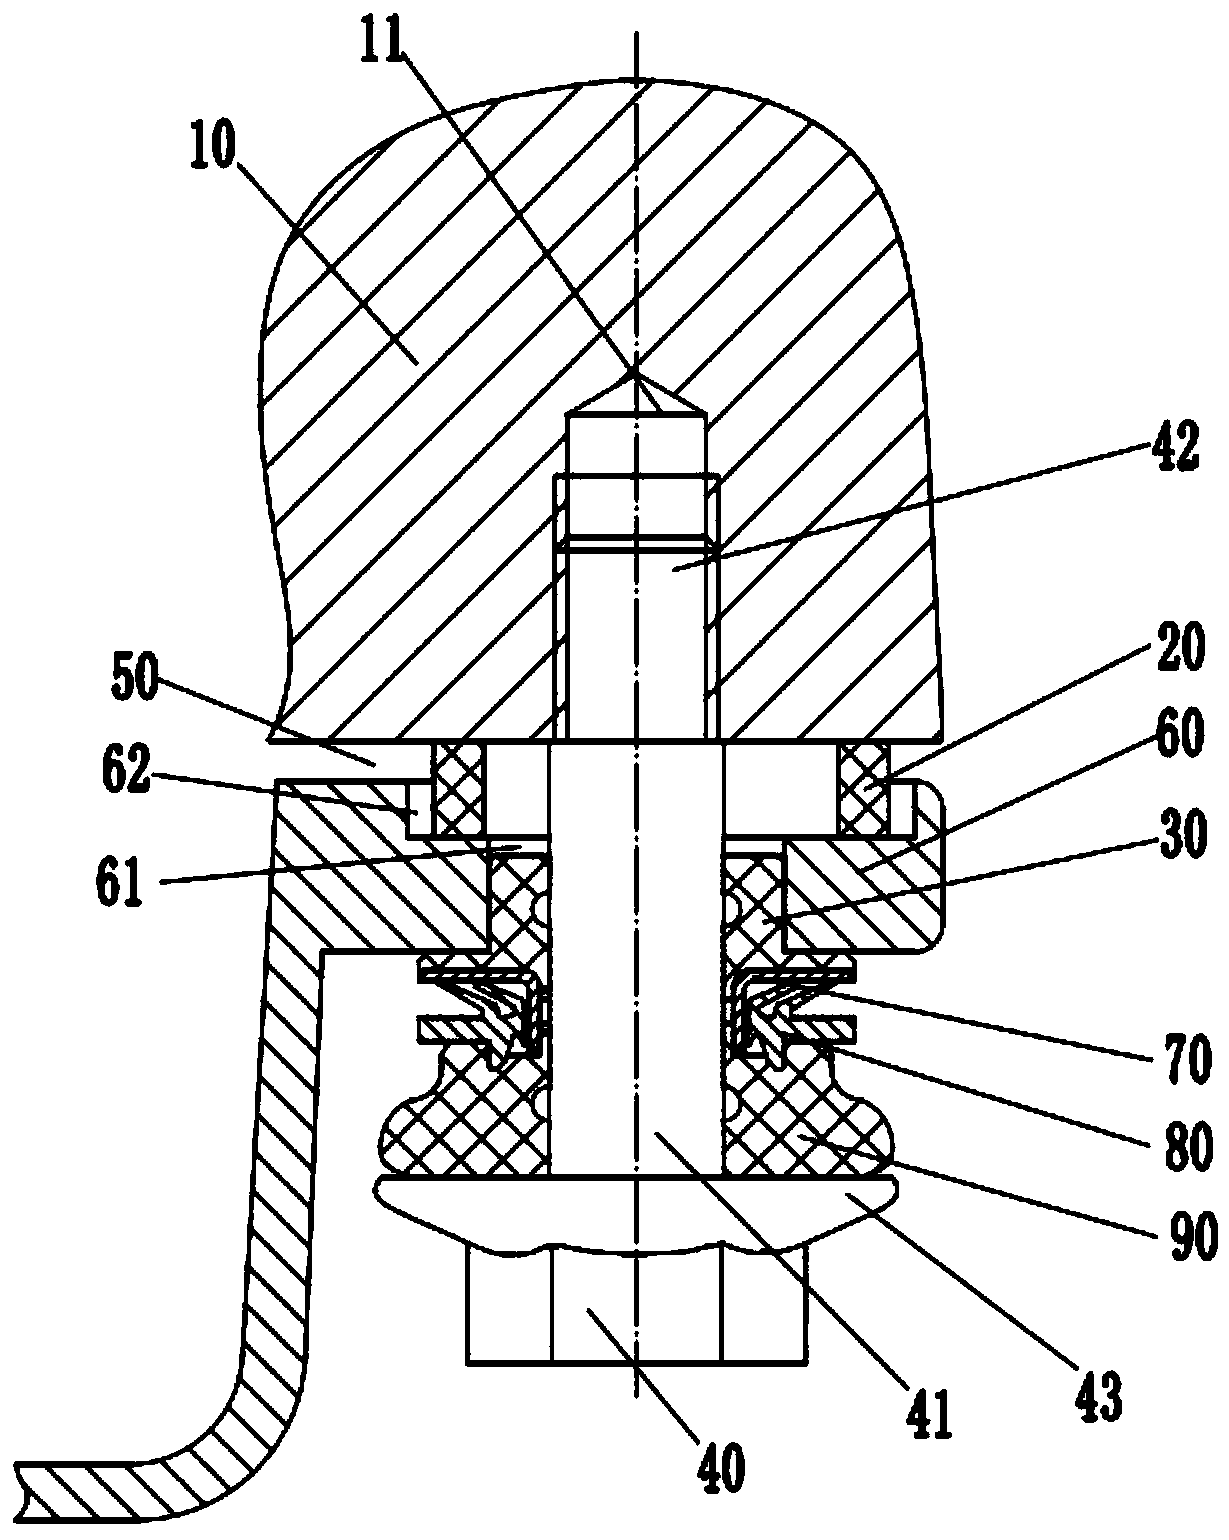 Oil sump connection device for internal combustion engine